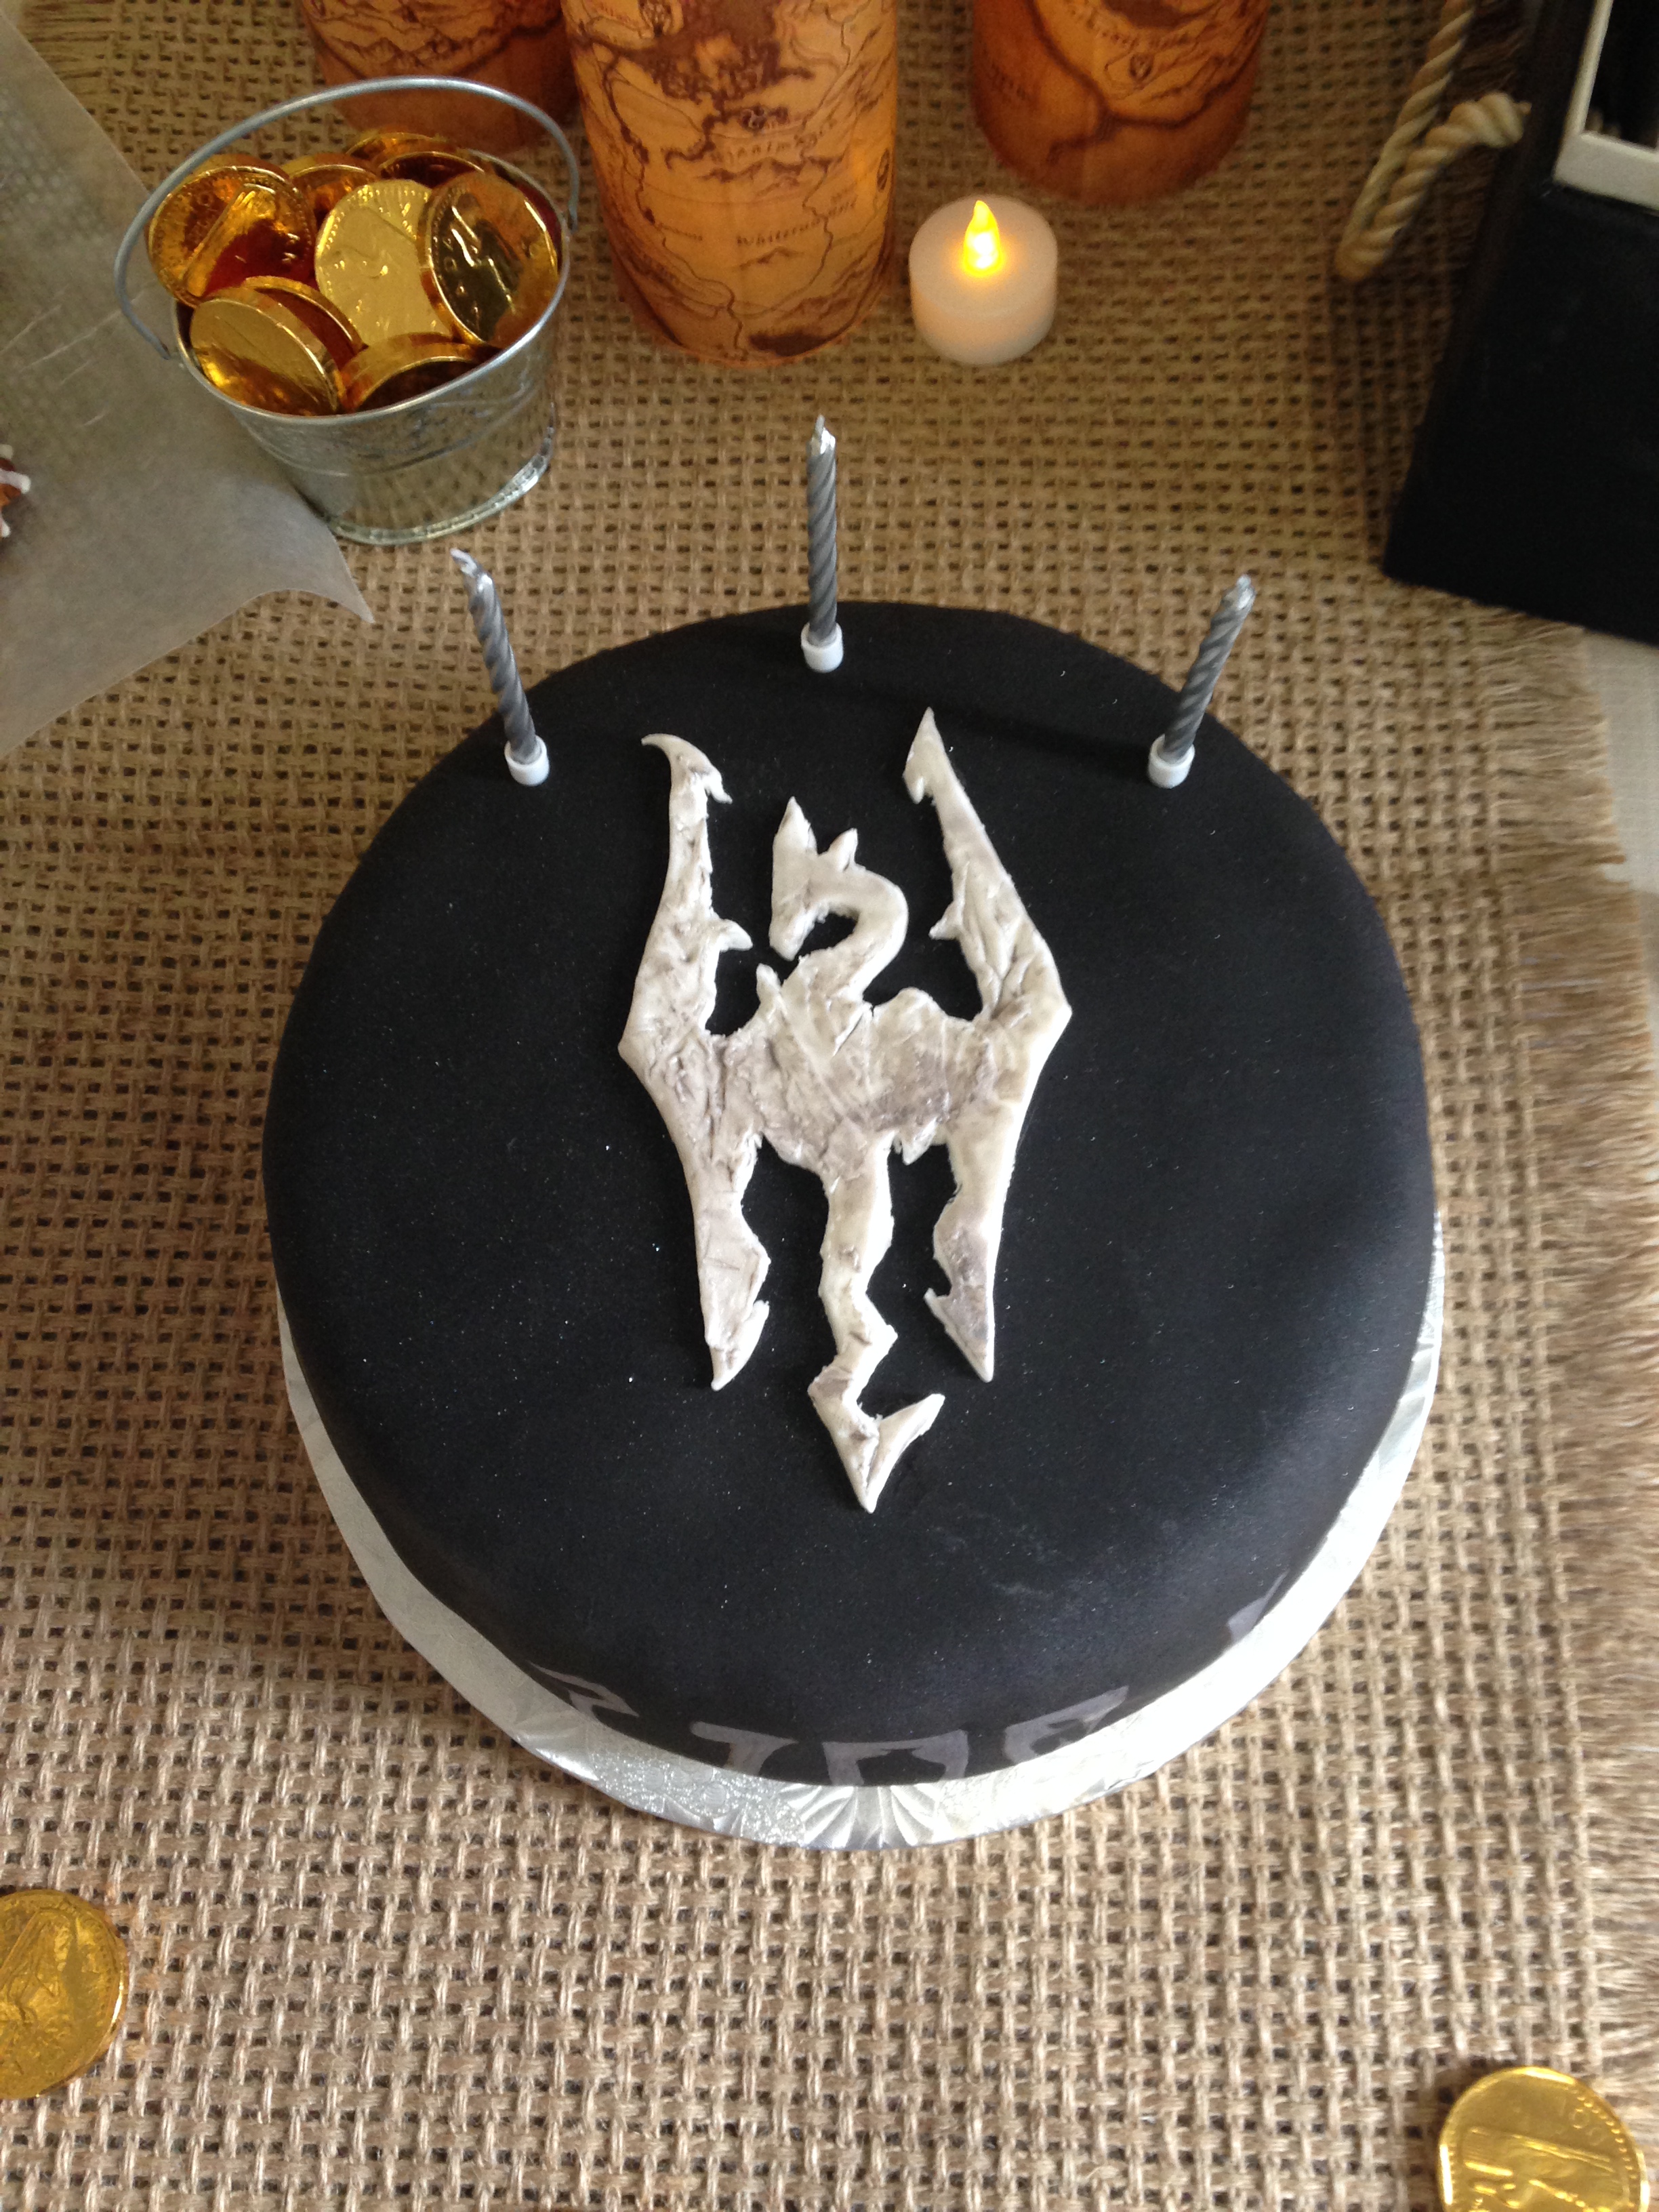 A Skyrim Fan Gets A Birthday Party Of A Lifetime